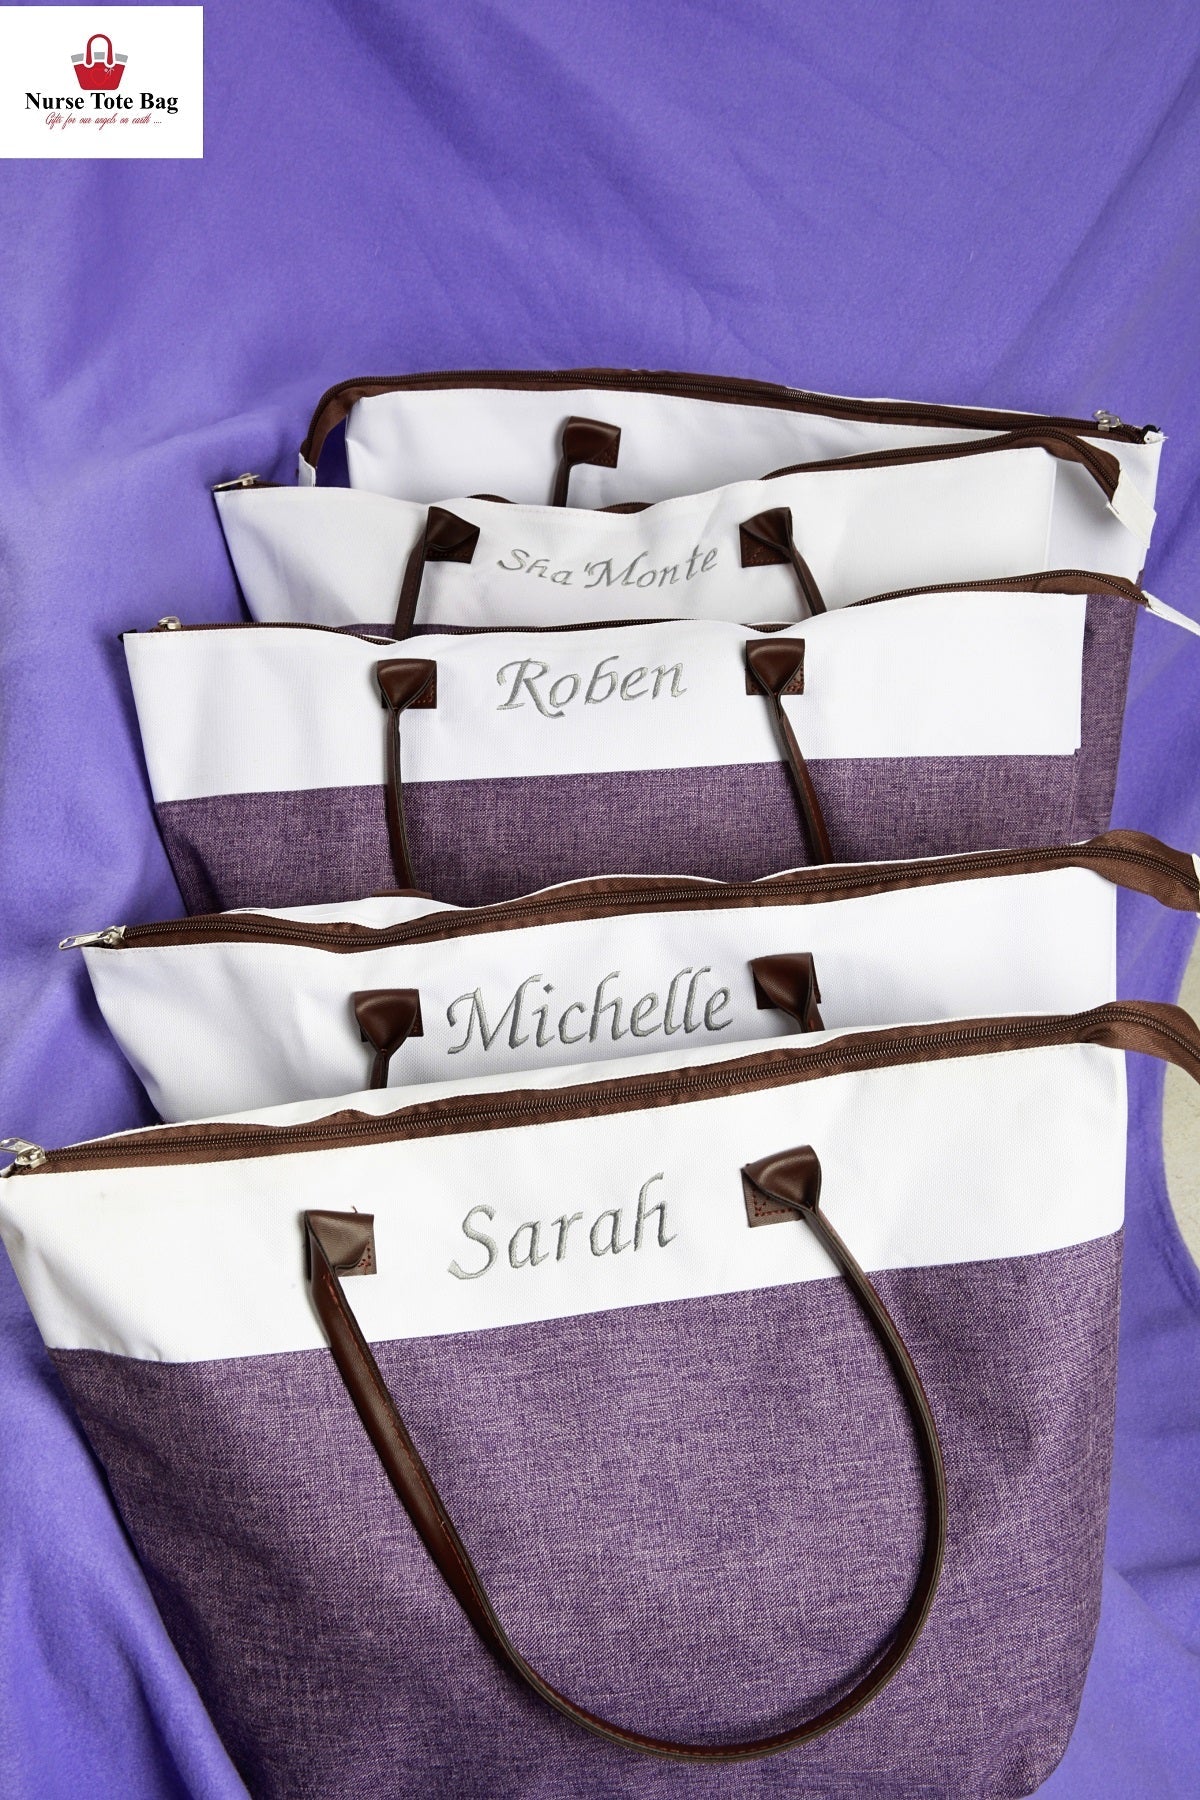 Customized Tote Bags - Monogrammed Personalized Tote Bags Group BravHUT Nurse Tote Bag